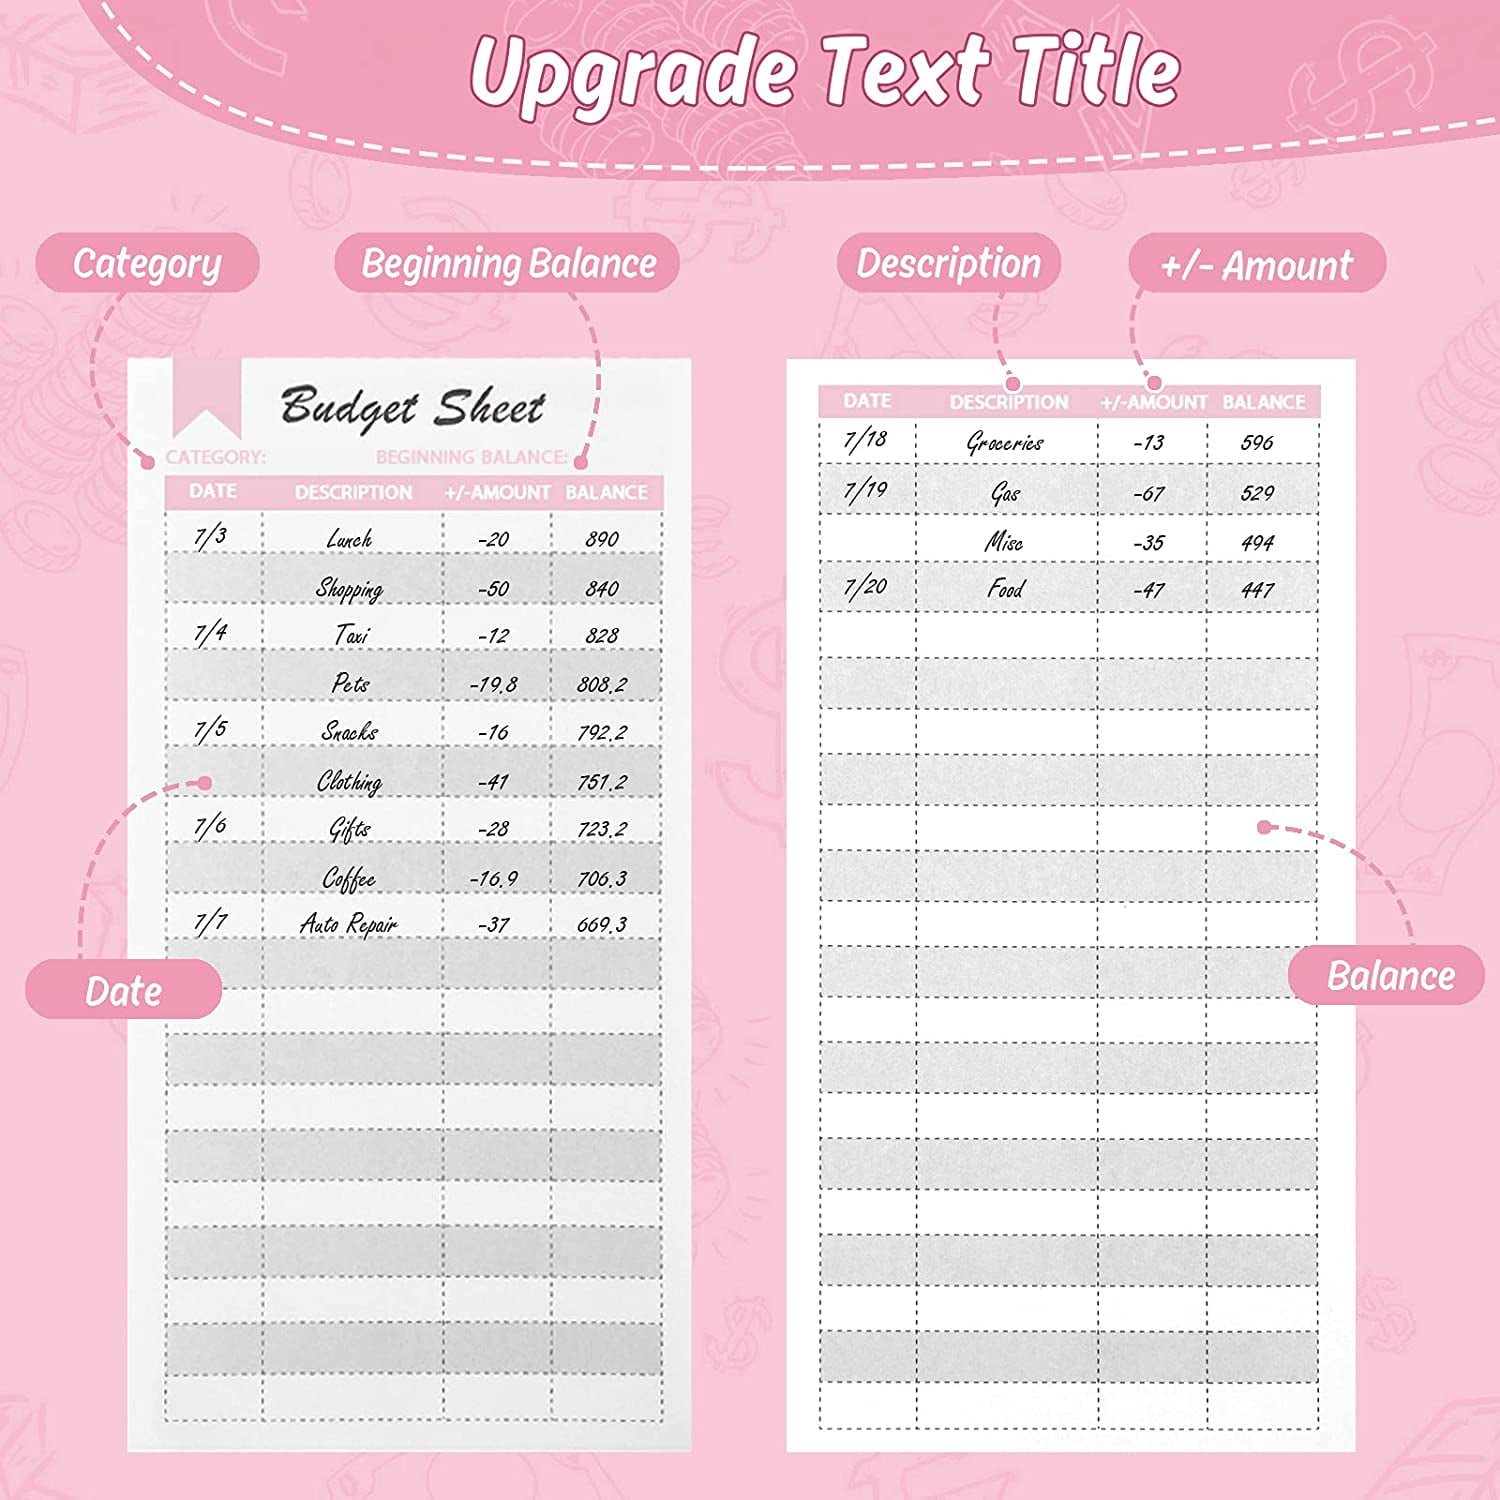 TPQ-011 Budget Stickers - 6 Sheet Set of 440+ Unique Budget Planner St –  The Planning Queen